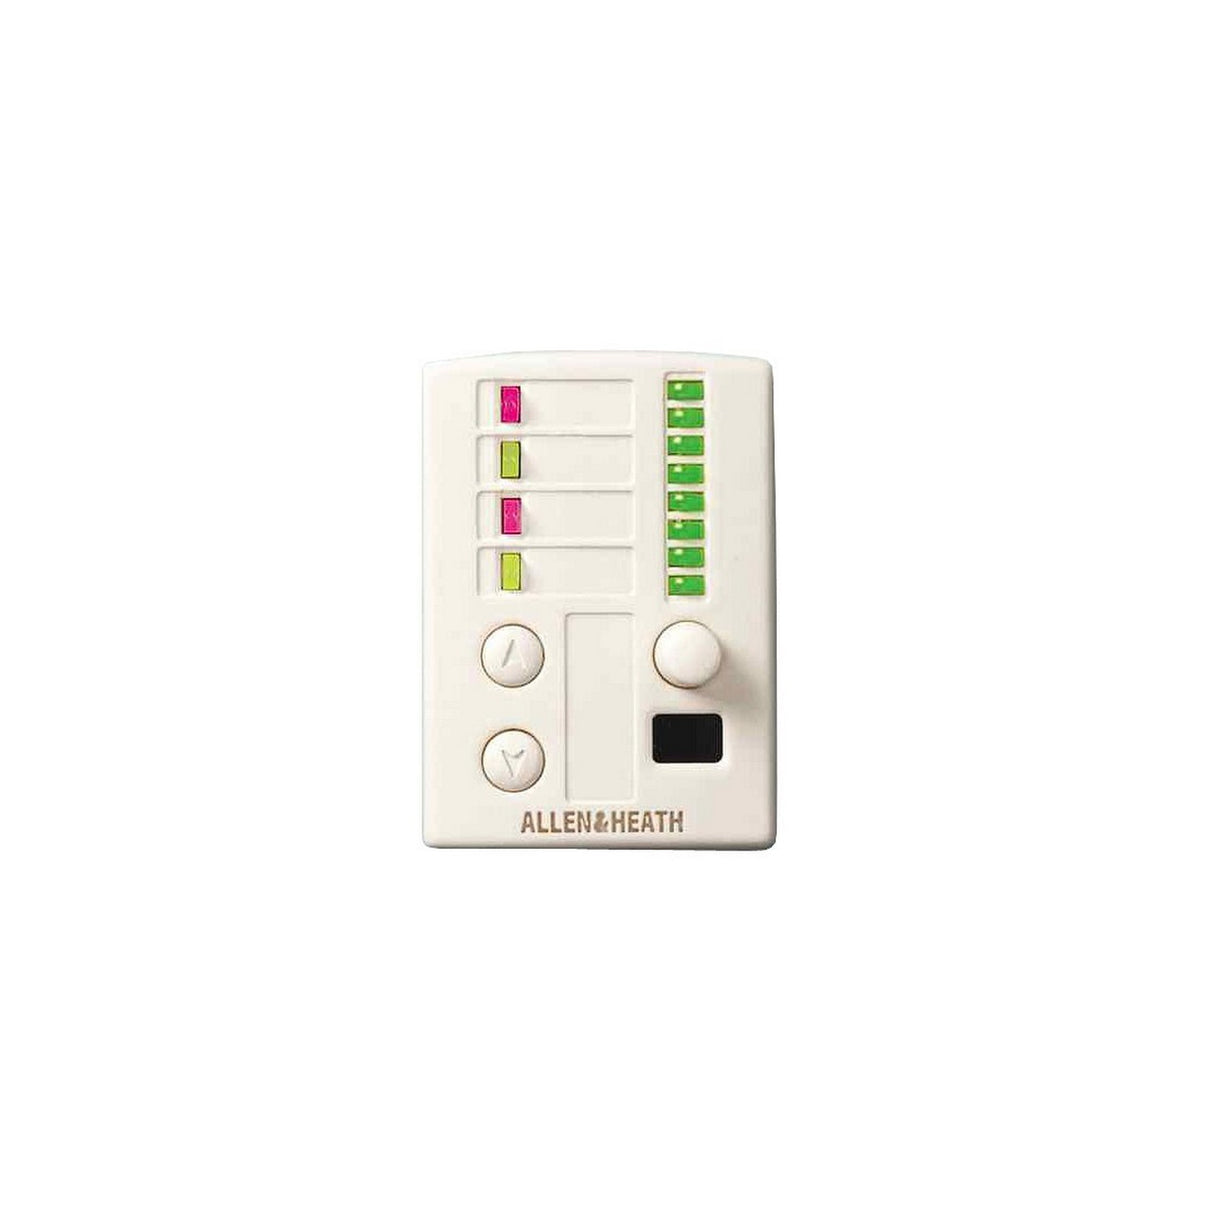 Allen & Heath PL-12 | GR2 Remote Control Wall Plate w/IR Sensor 2 Programmable Switches 4 LEDs